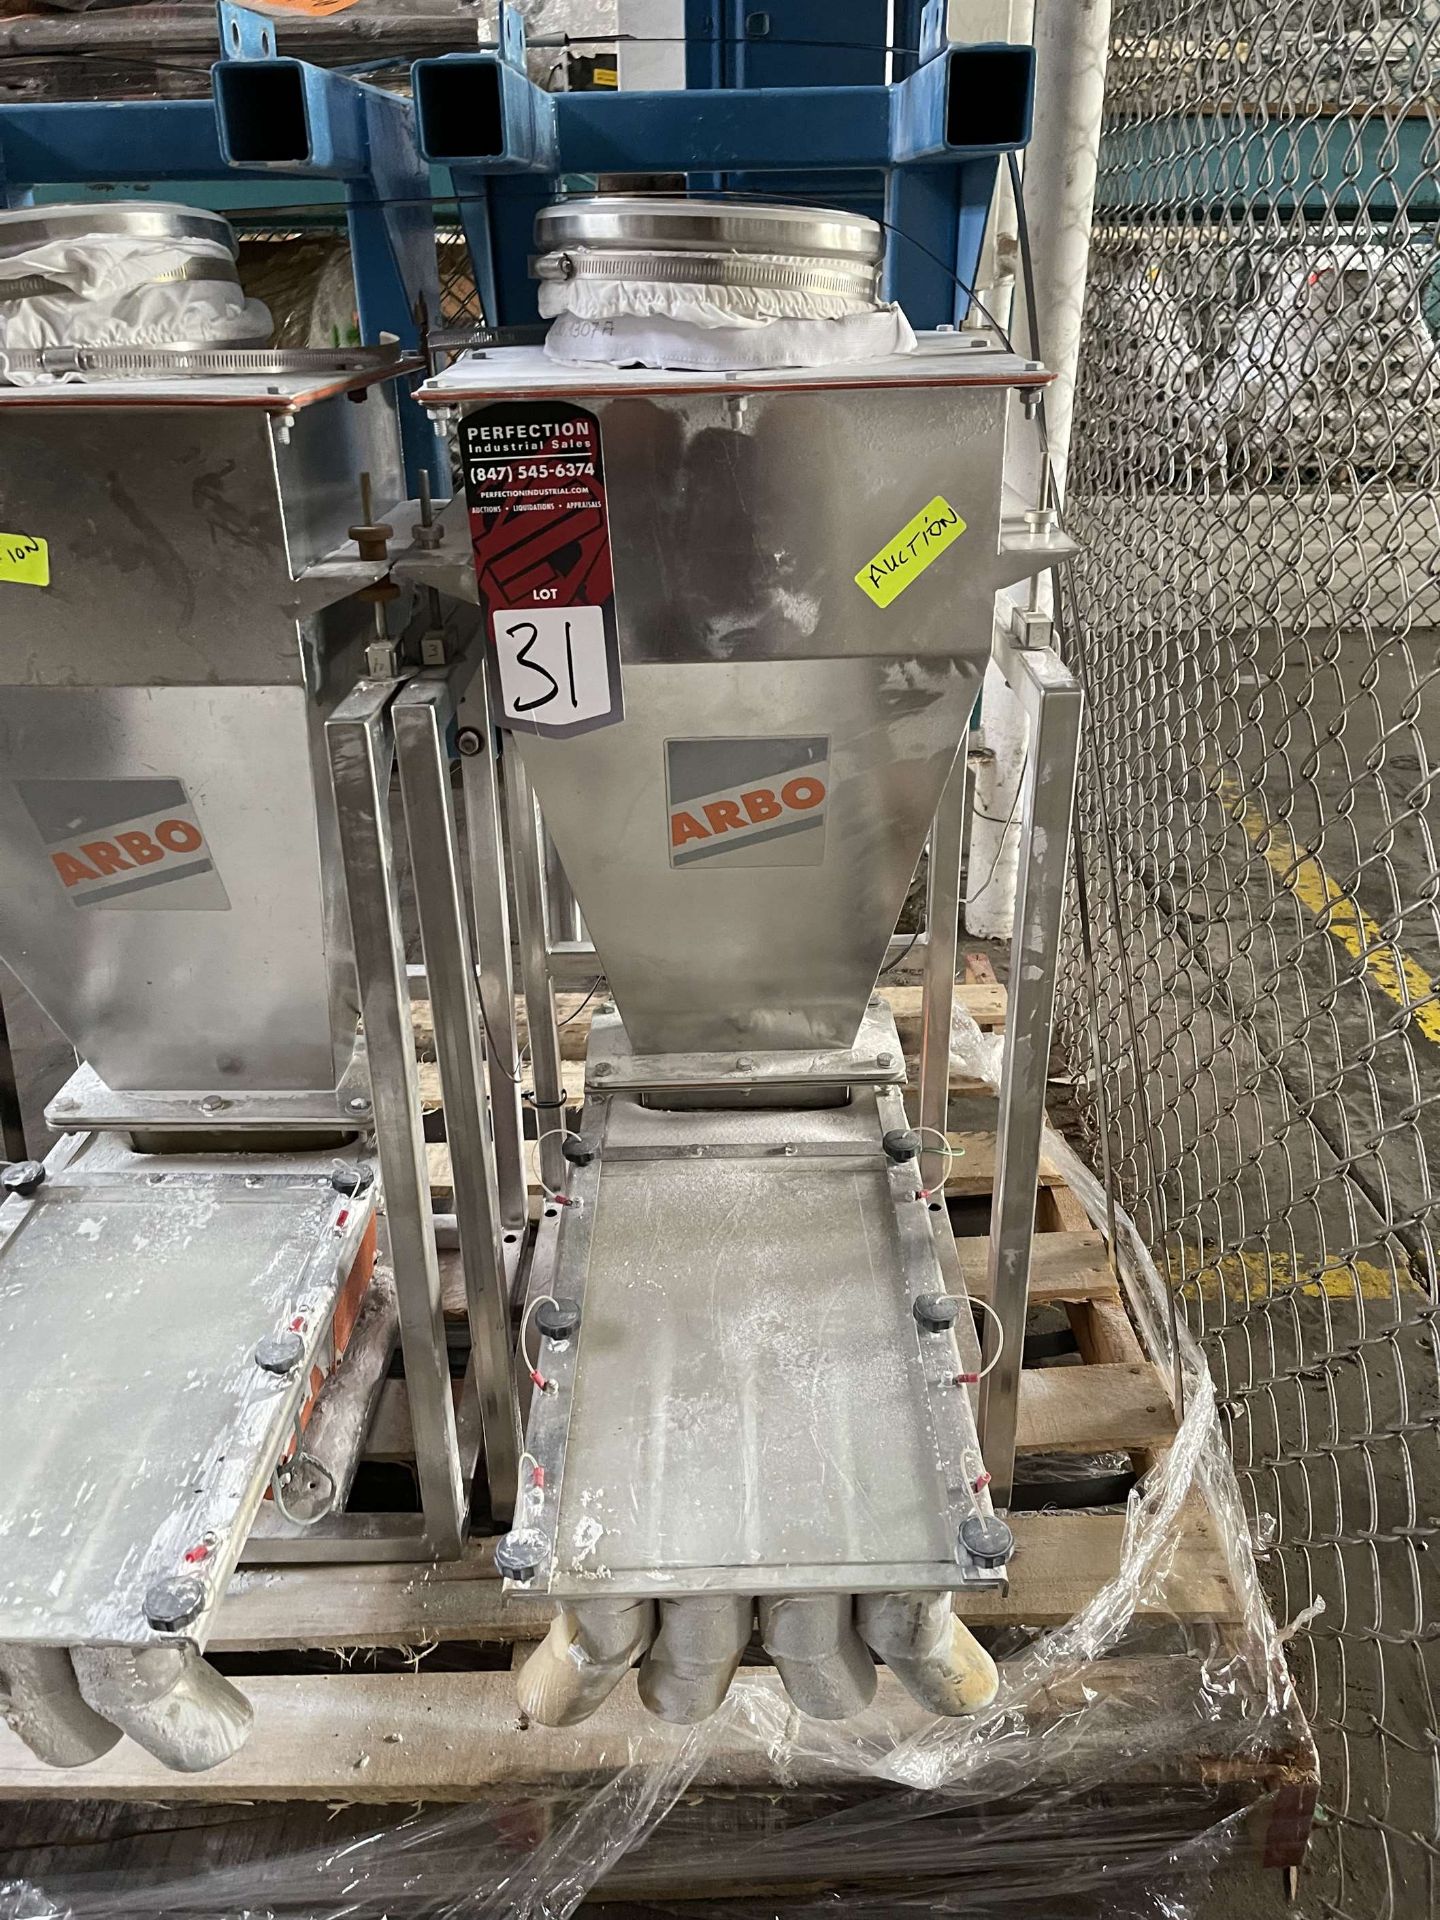 2008 ARBO Vibratory Tray Feeder w/ AF15-CS-110-14 Drive and SS Hopper, s/n V1971, w/ Load Cell